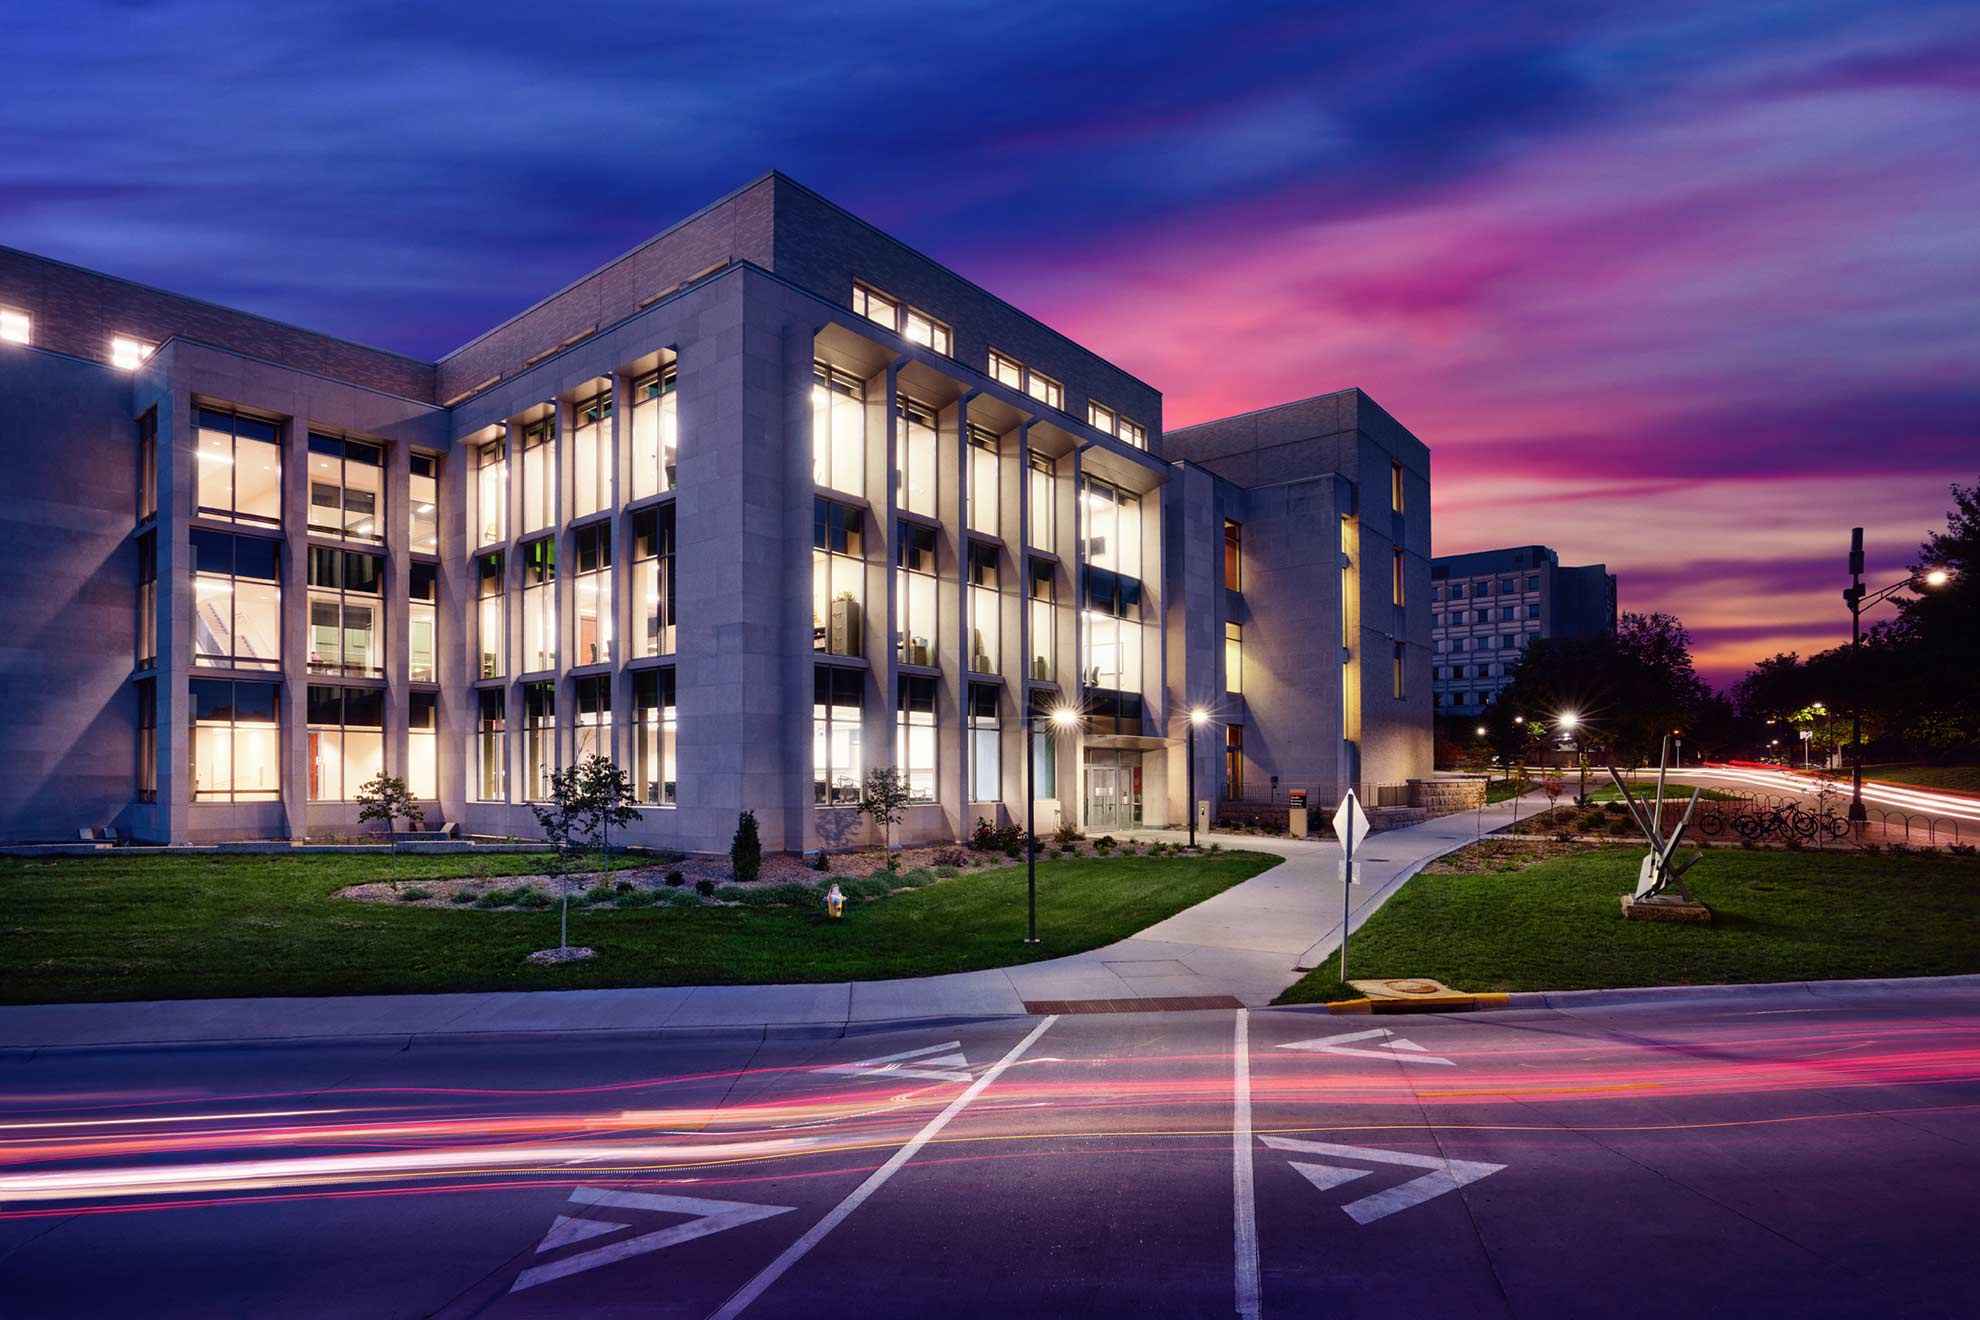 Ivy College of Business, Gerdin Business Building photographed at Dusk